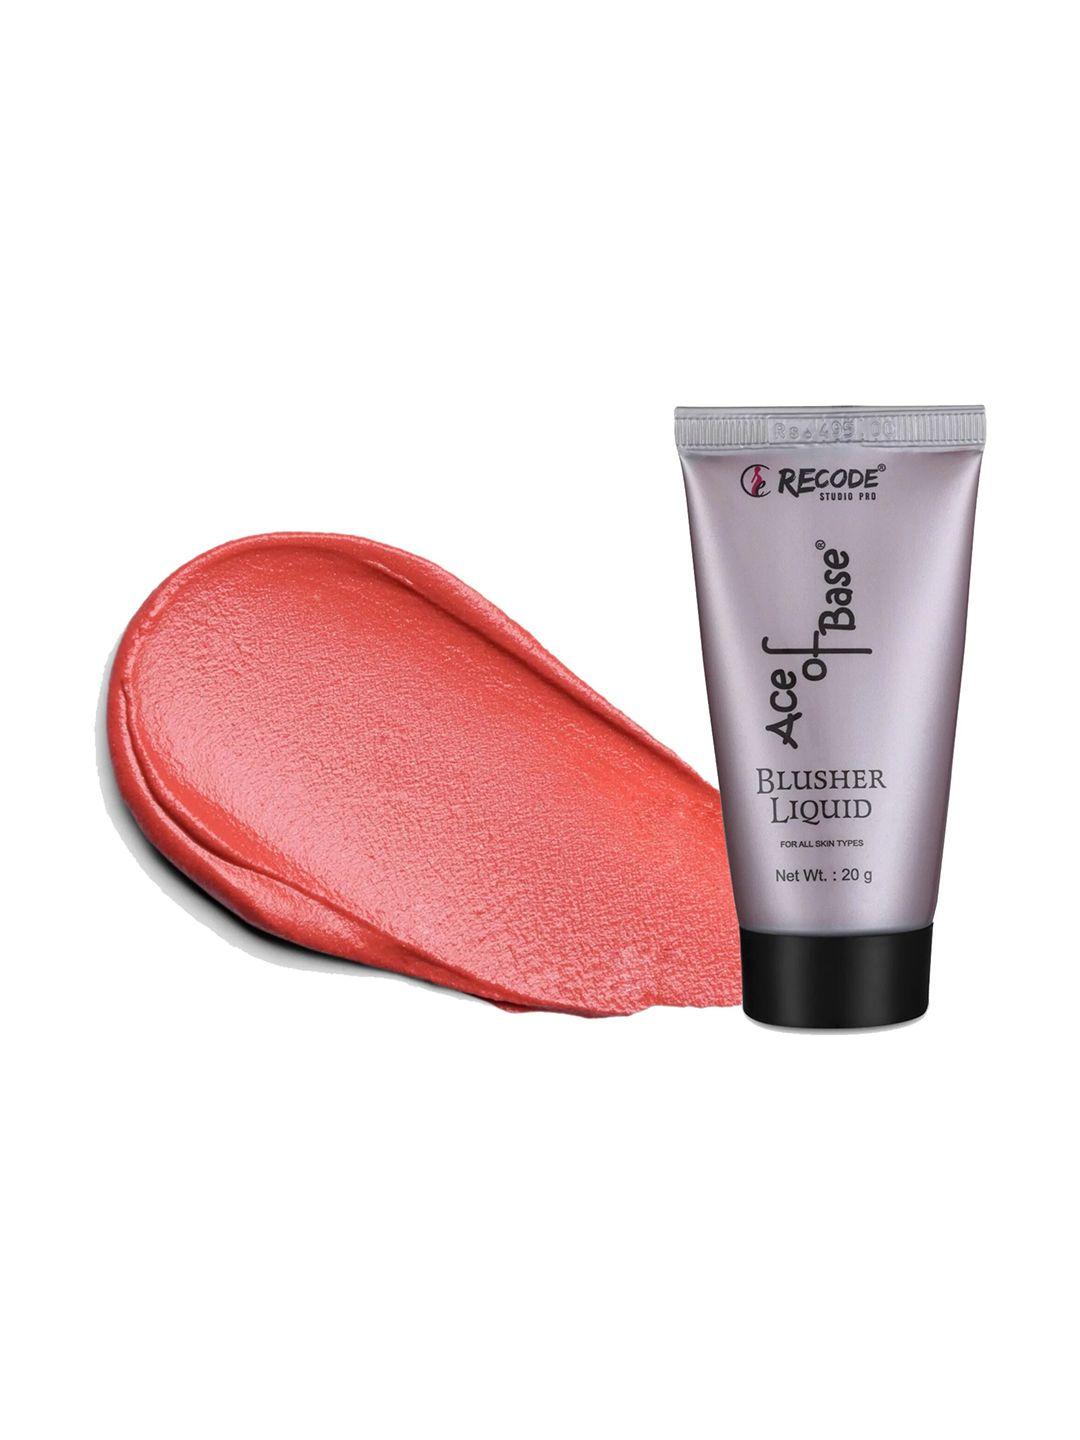 recode ace of base liquid blusher 20 g - loose control 01